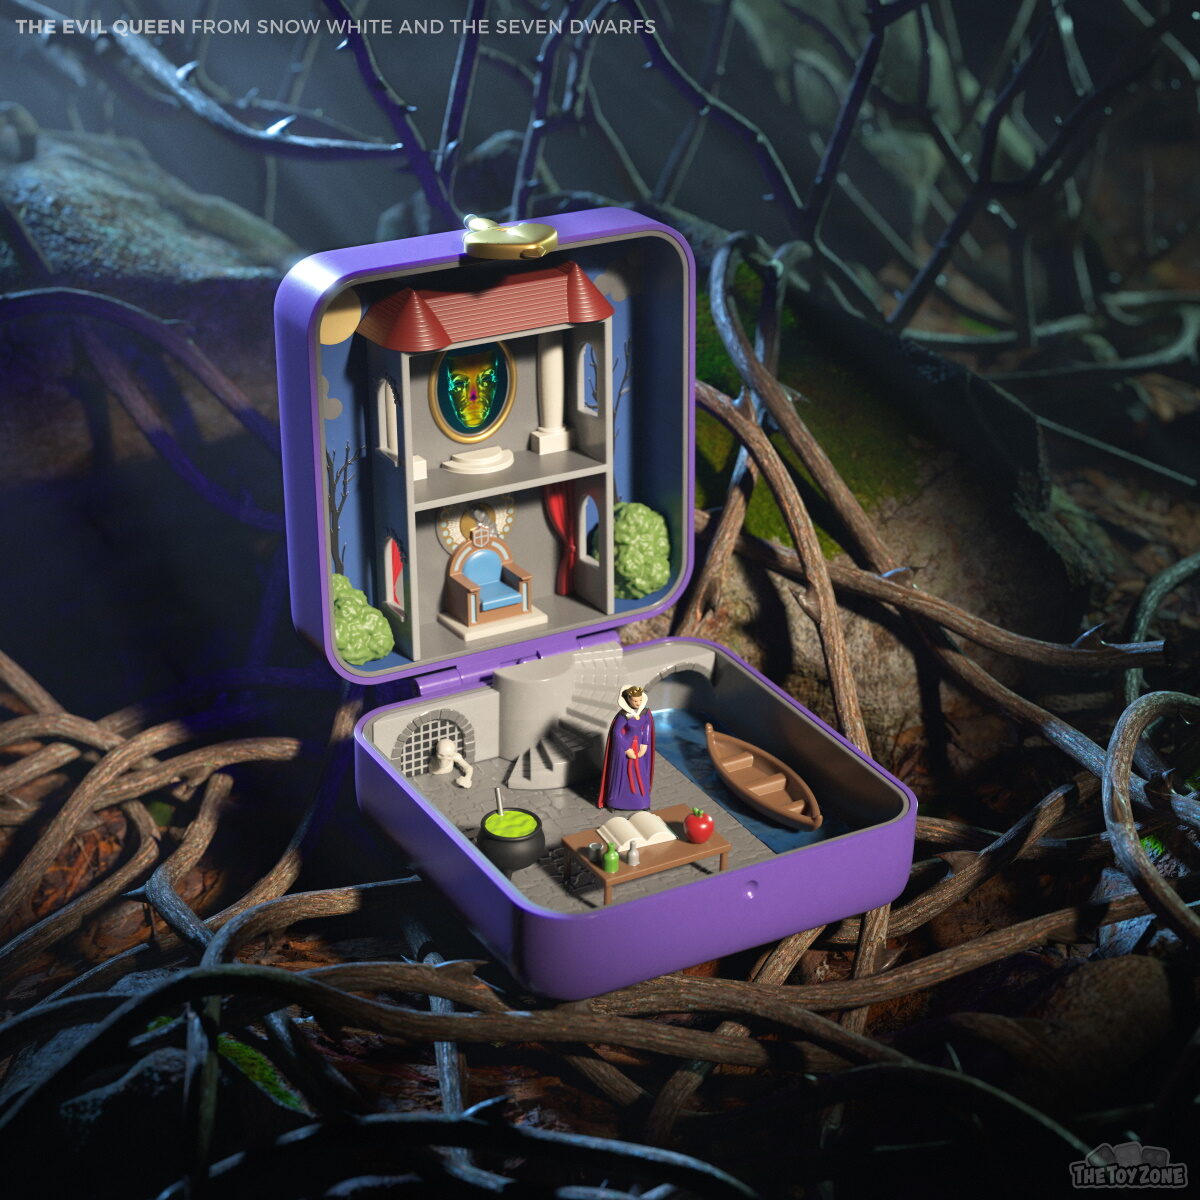 TheToyZone recreates the Evil Queen's lair with Polly Pocket